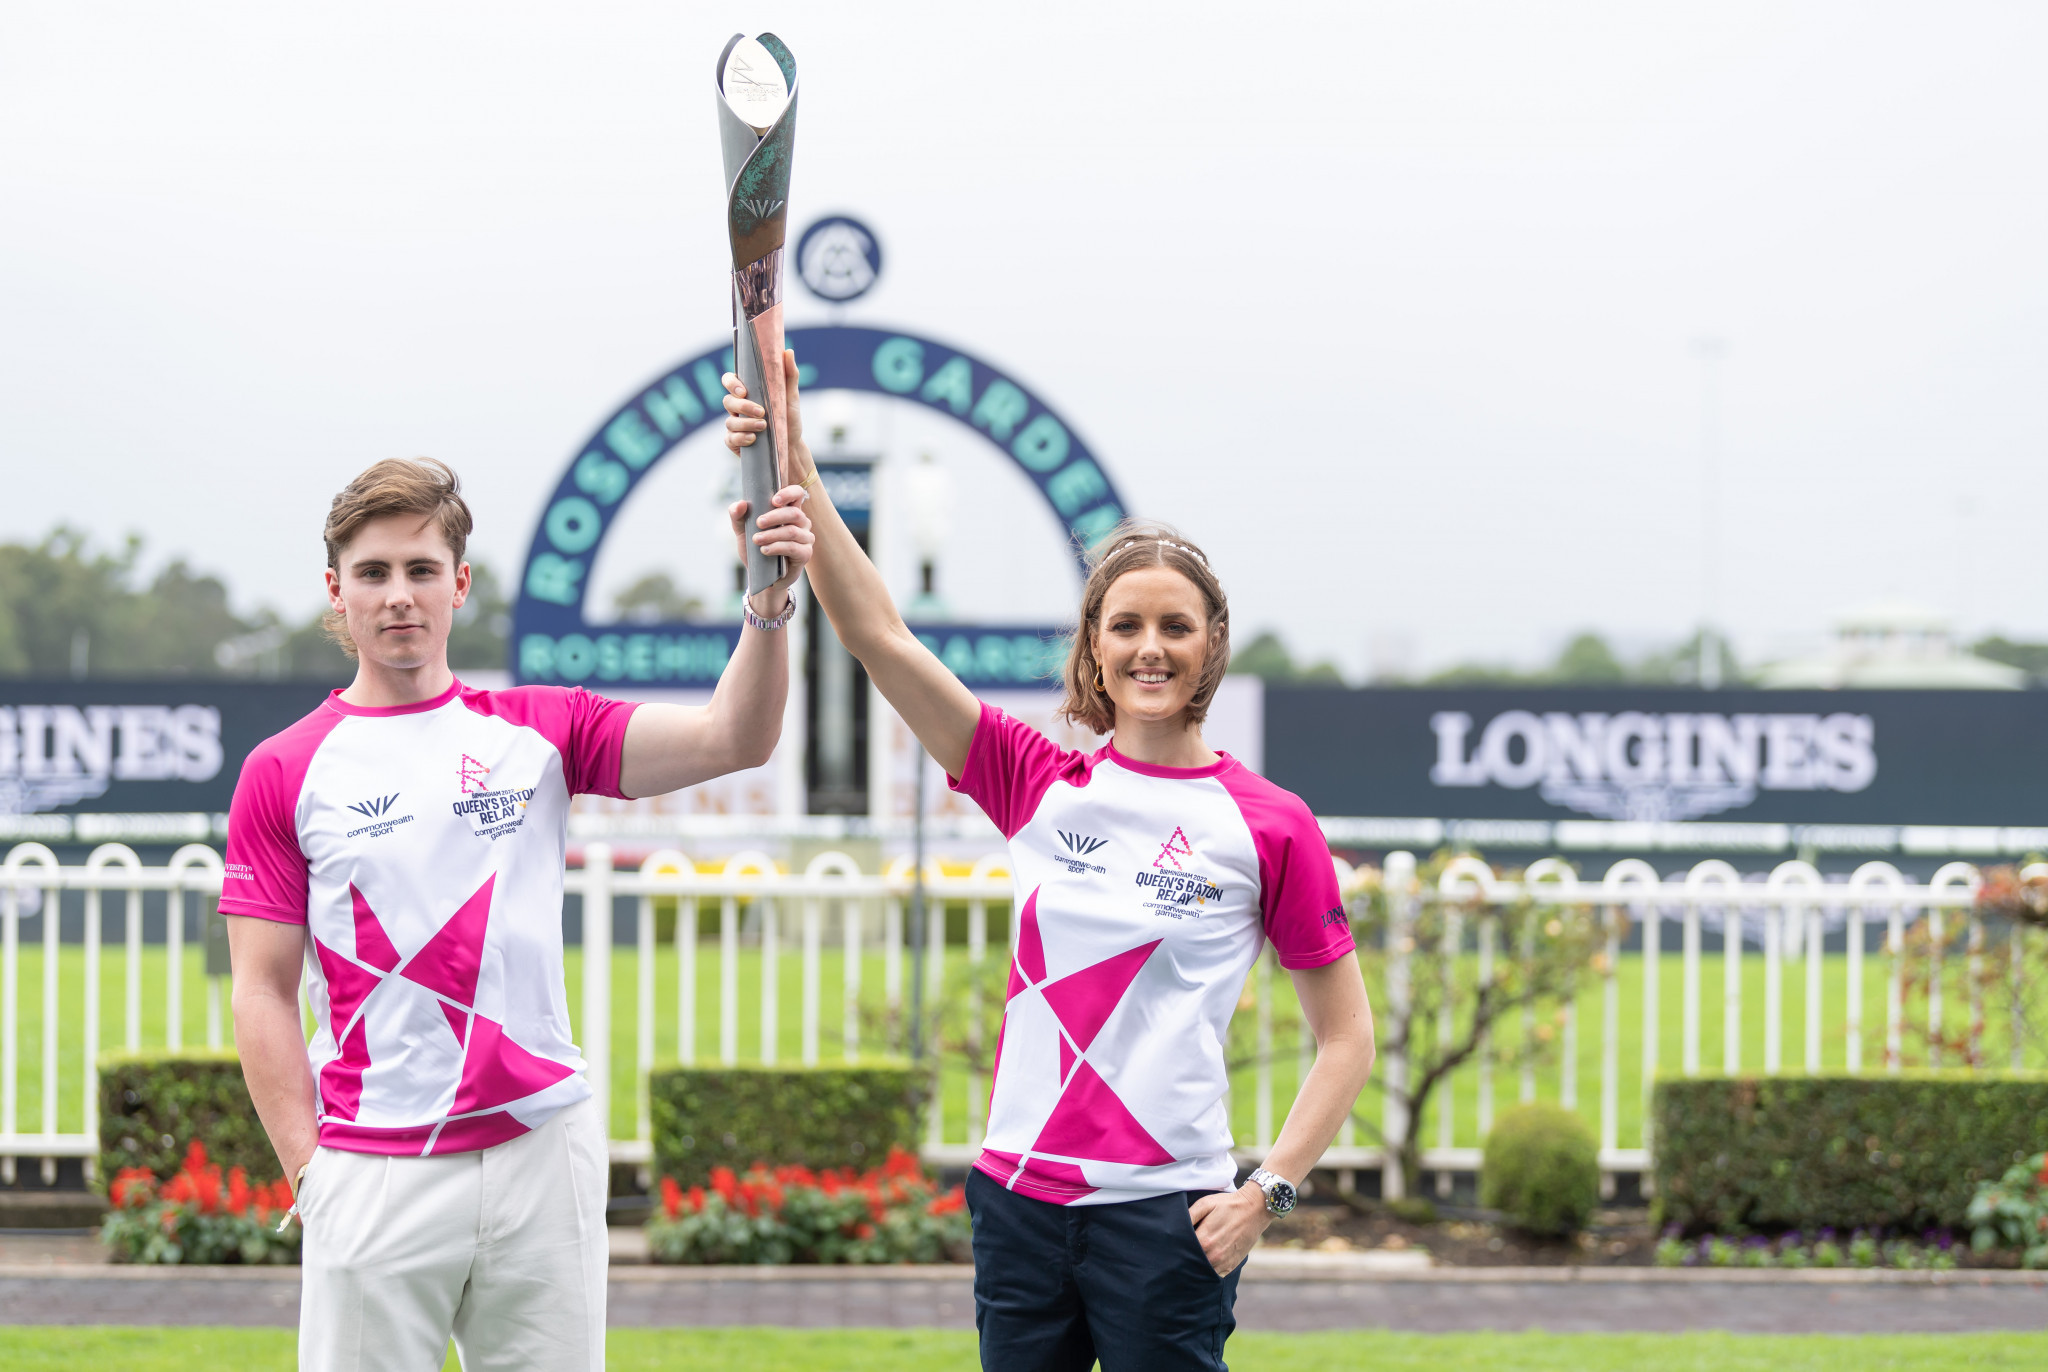 Ellie Cole, right, carried the Birmingham 2022 Baton at Rosehill Gardens racecourse in New South Wales ©Getty Images